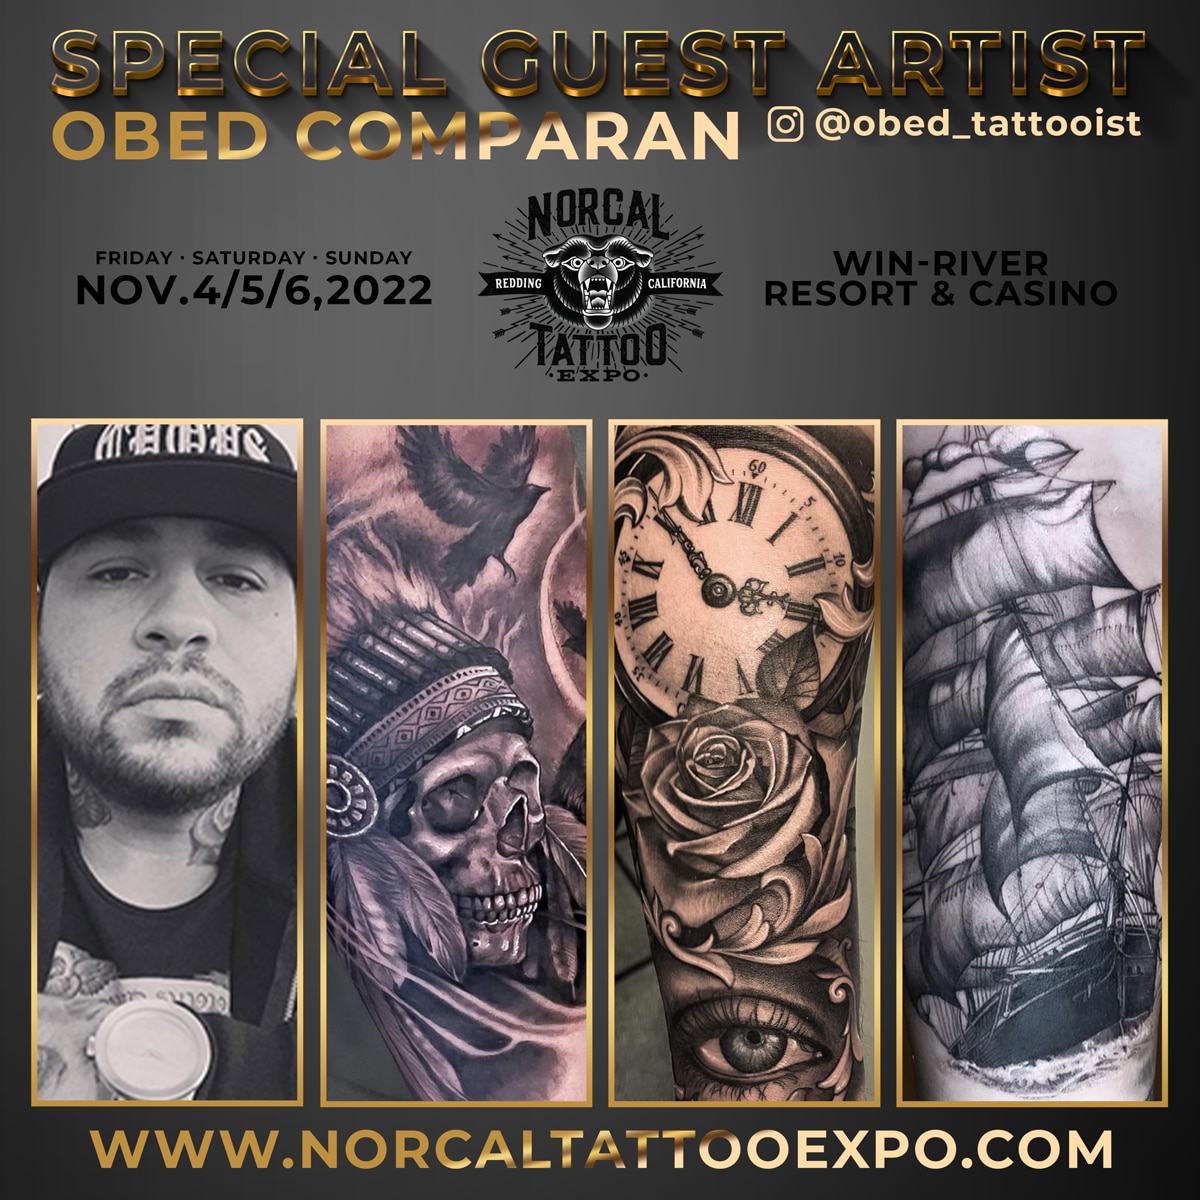 Artists - Norcal Tattoo Expo